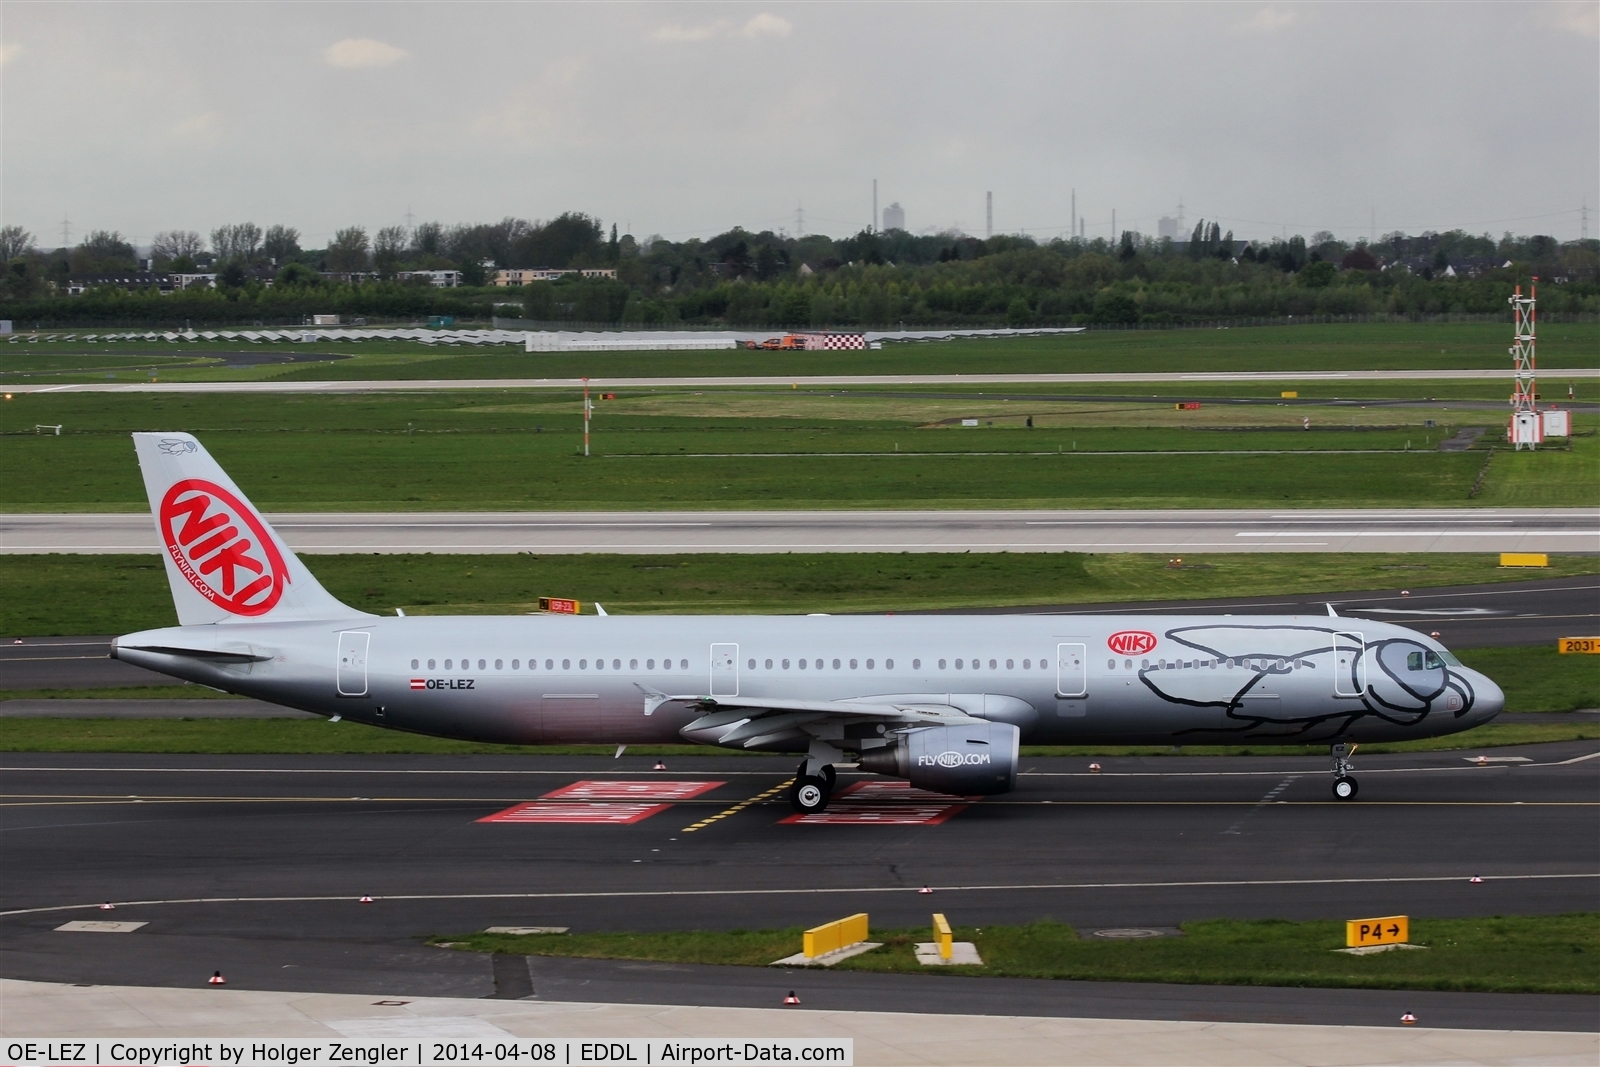 OE-LEZ, 2011 Airbus A321-211 C/N 4648, Another NIKI aircraft of famous dance collection....